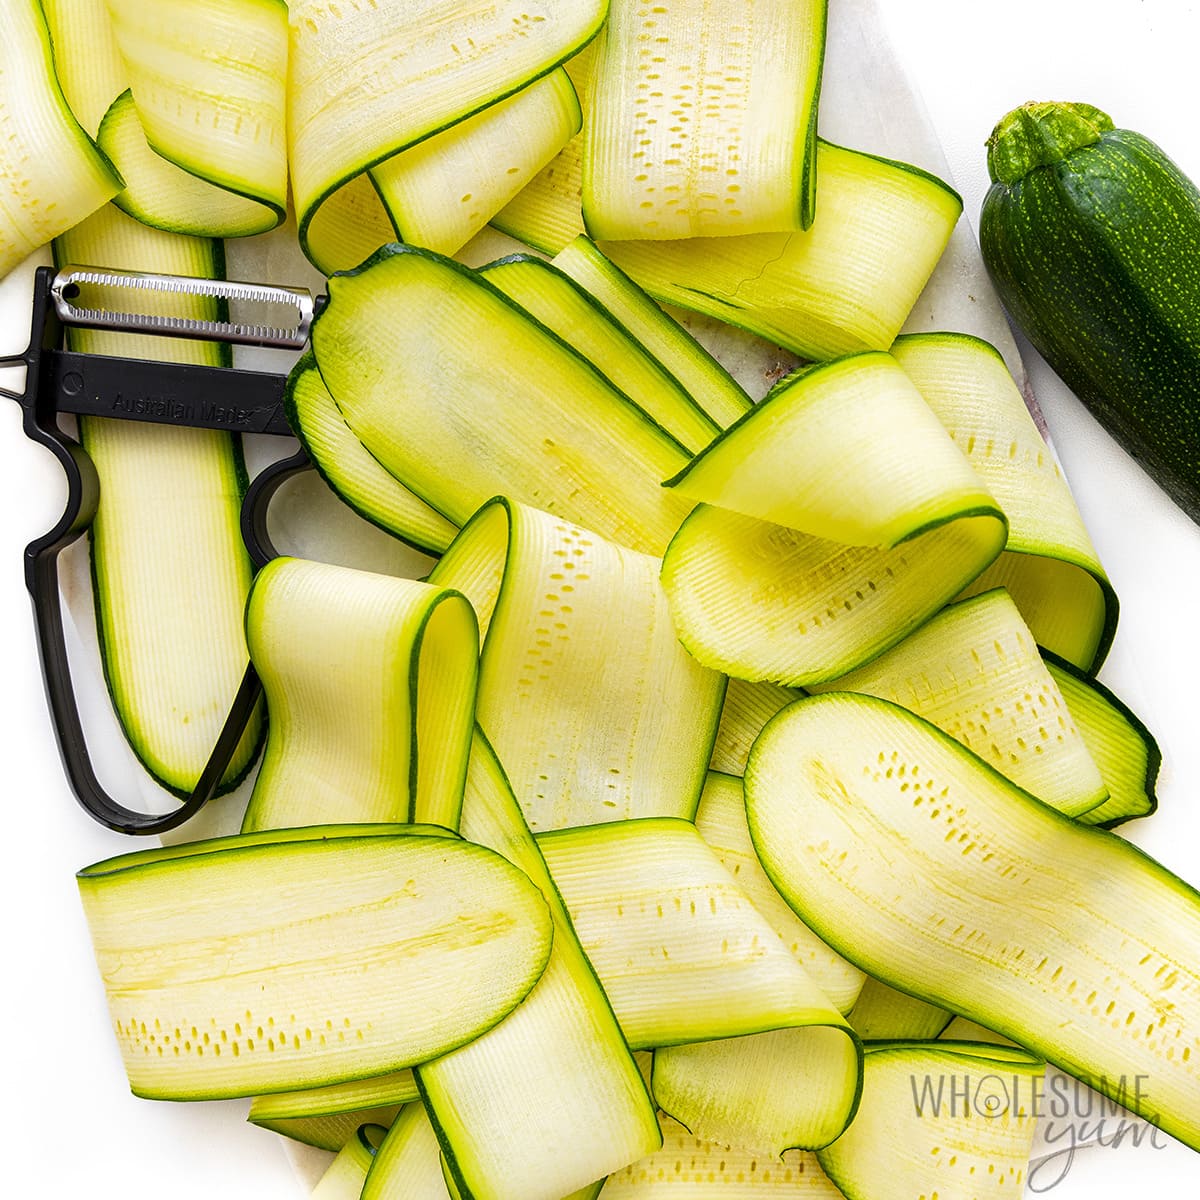 Zucchini sliced into ribbons.